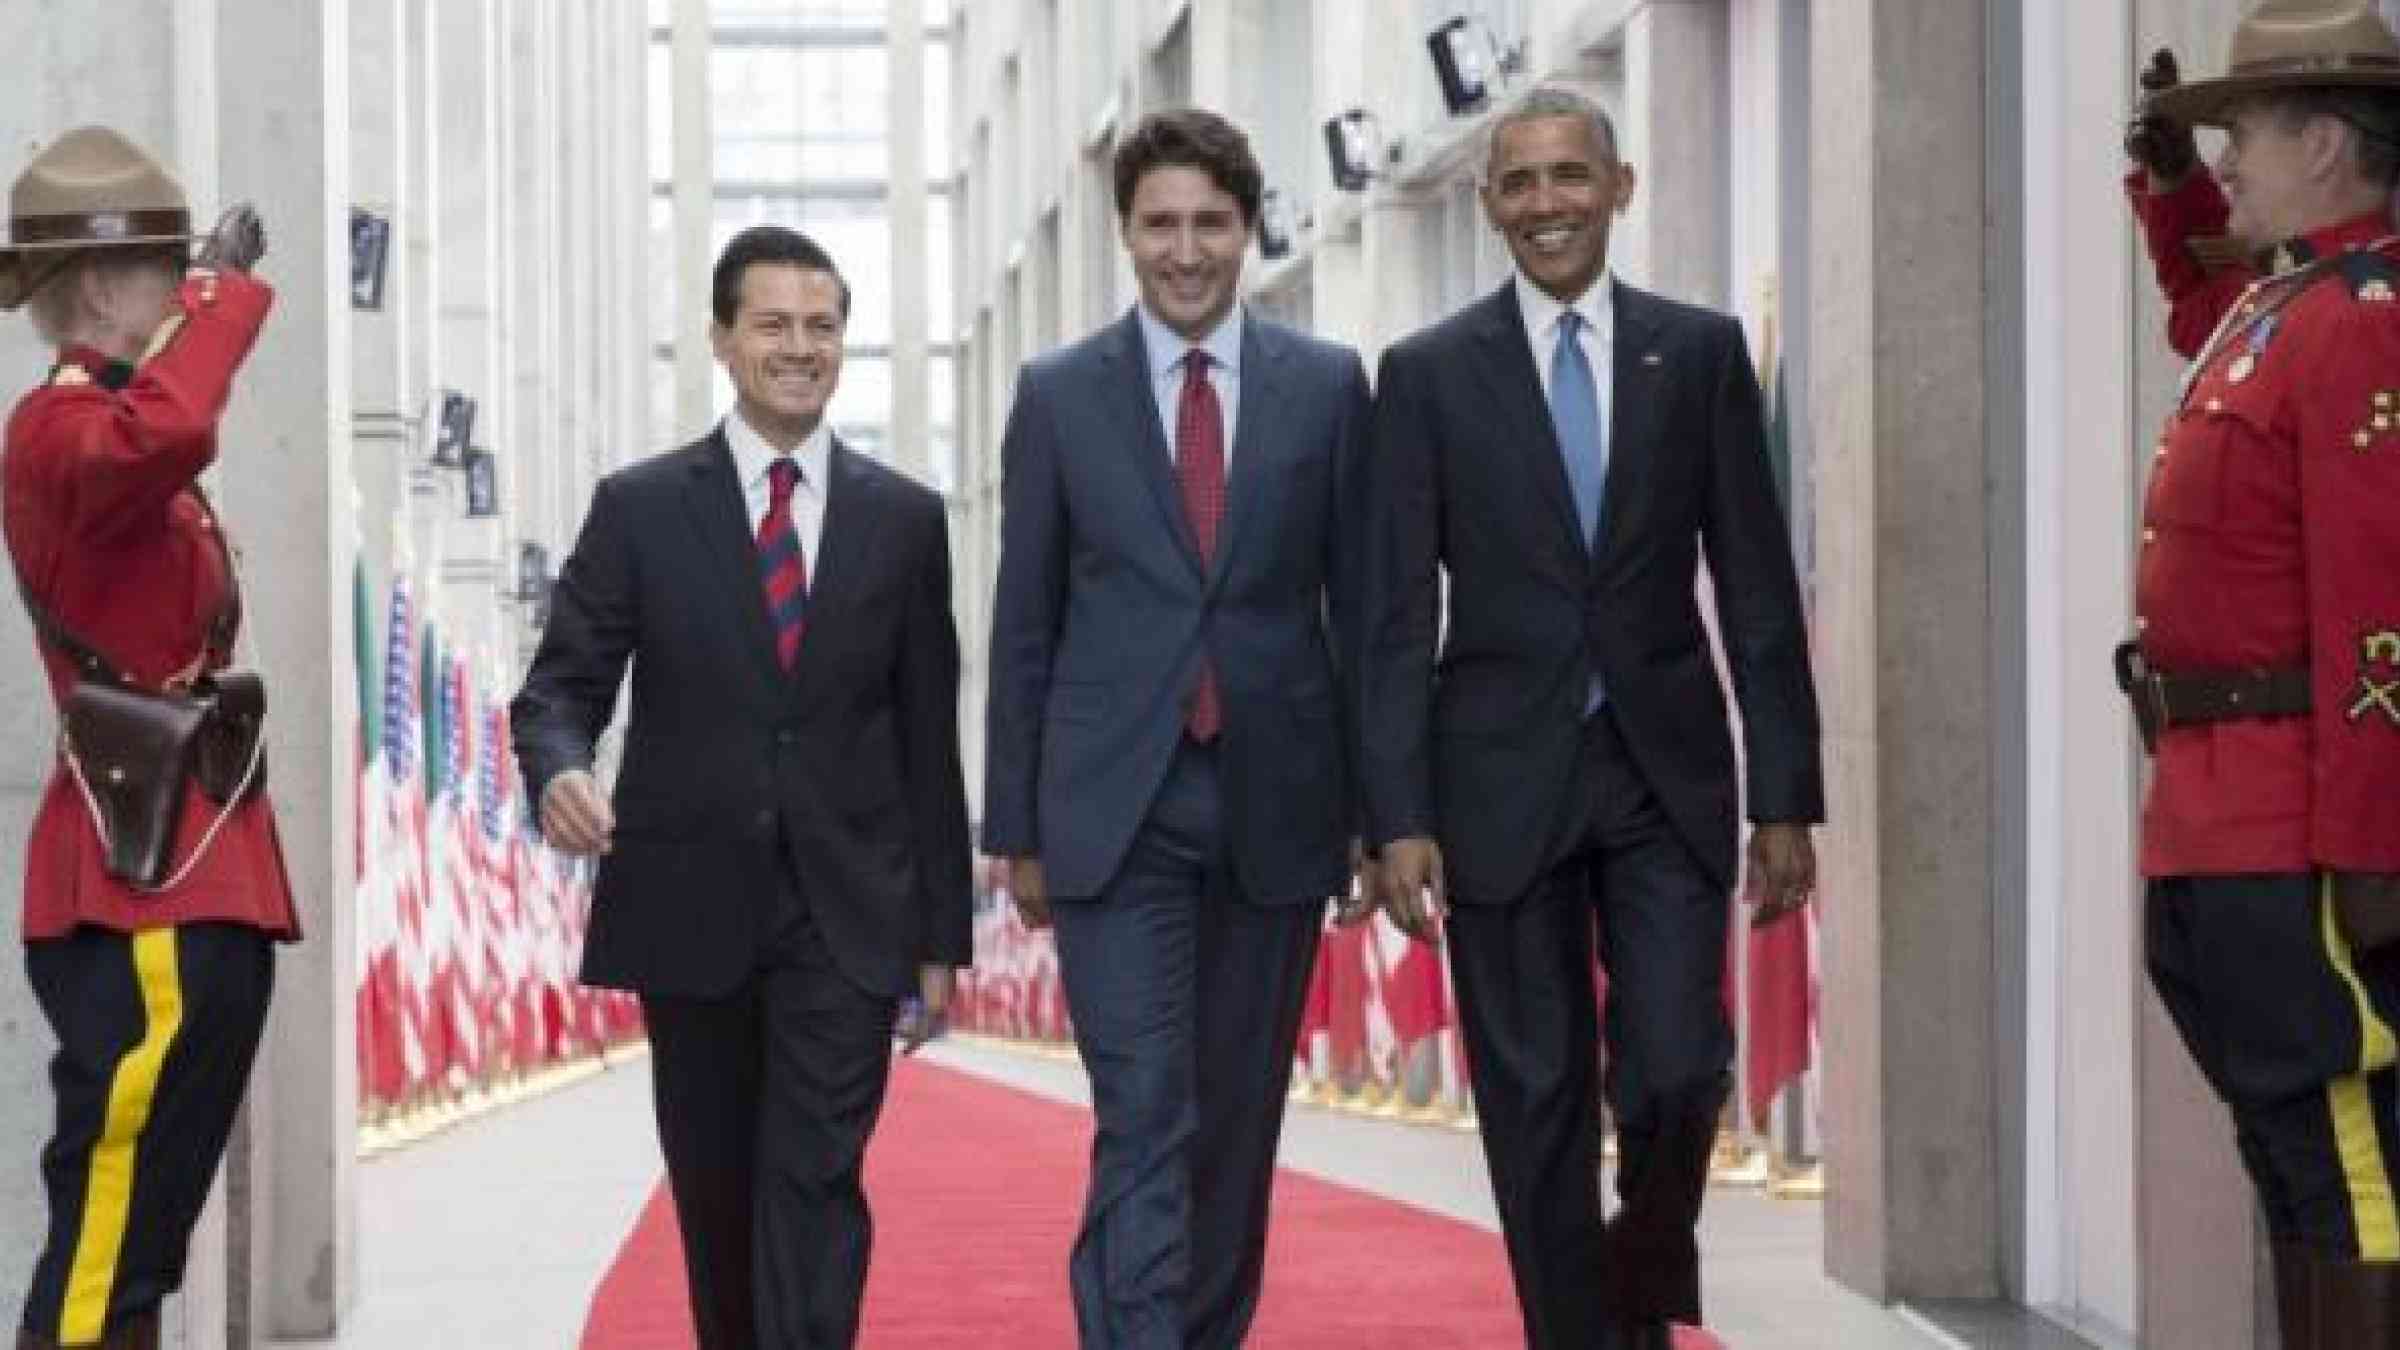 (from left) President Enrique Peña Nieto, Mexico,Prime Minister, Justin Trudeau, Canada, and President Barack Obama, USA; and